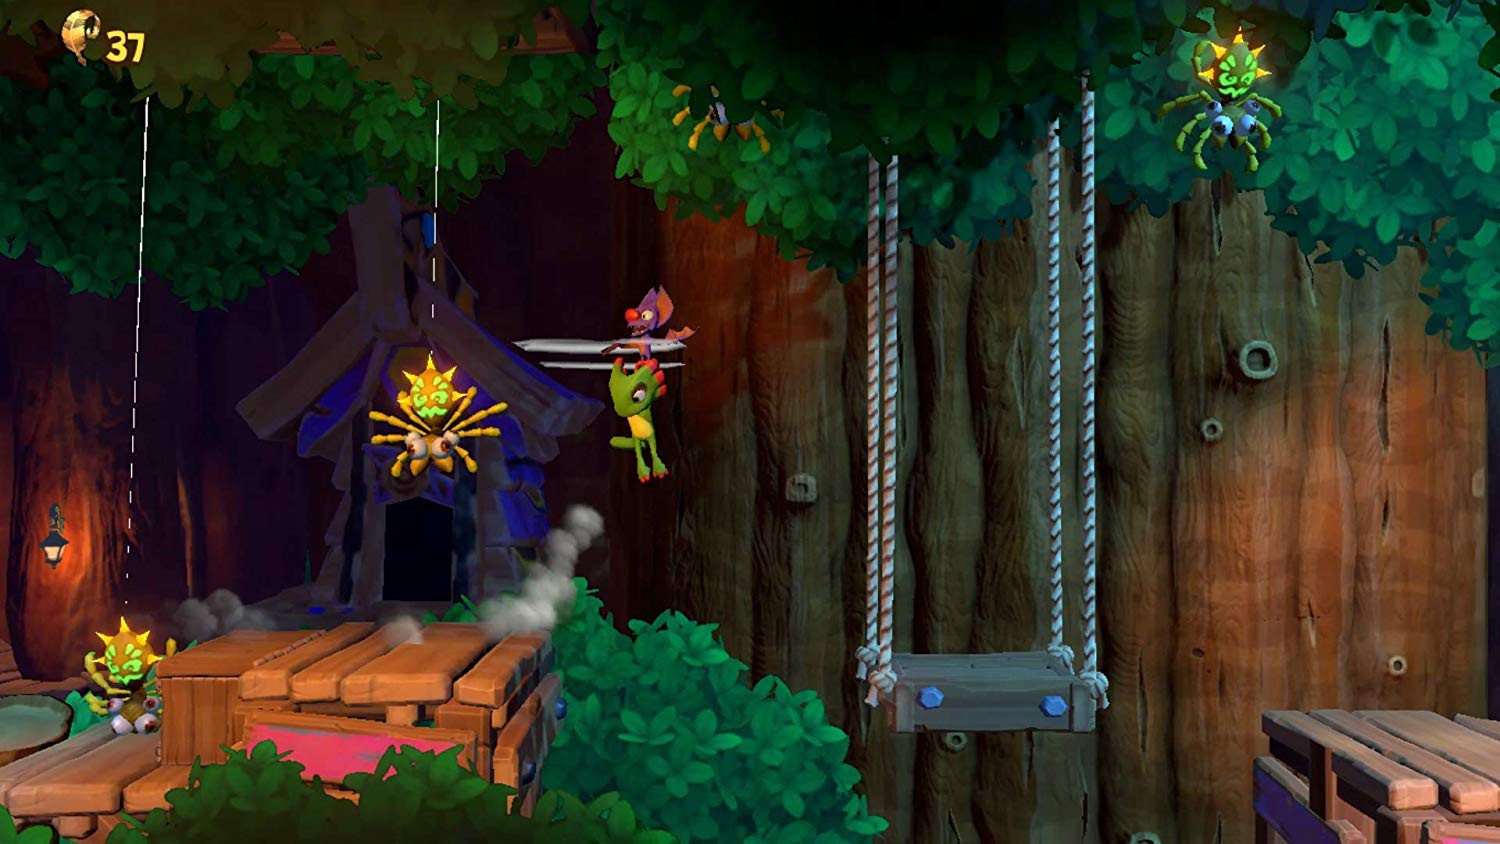 Yooka-Laylee and The Impossible Lair